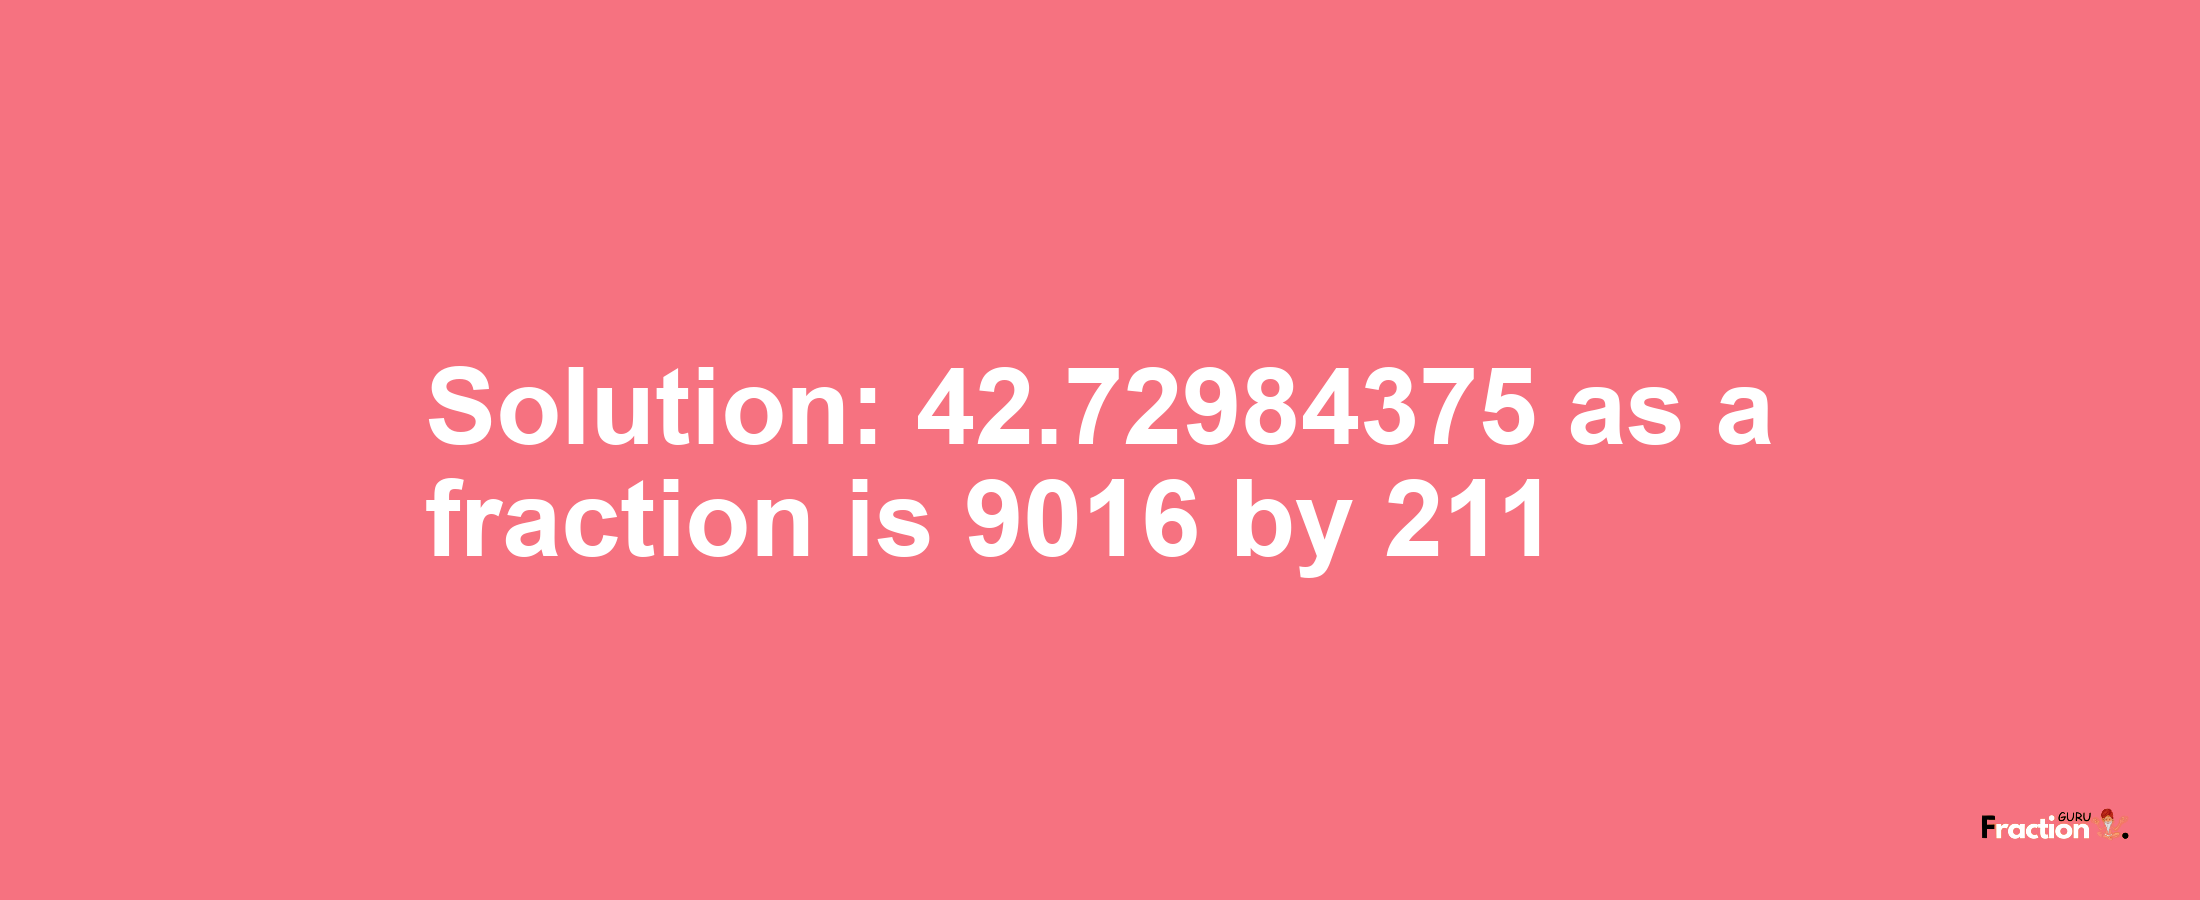 Solution:42.72984375 as a fraction is 9016/211